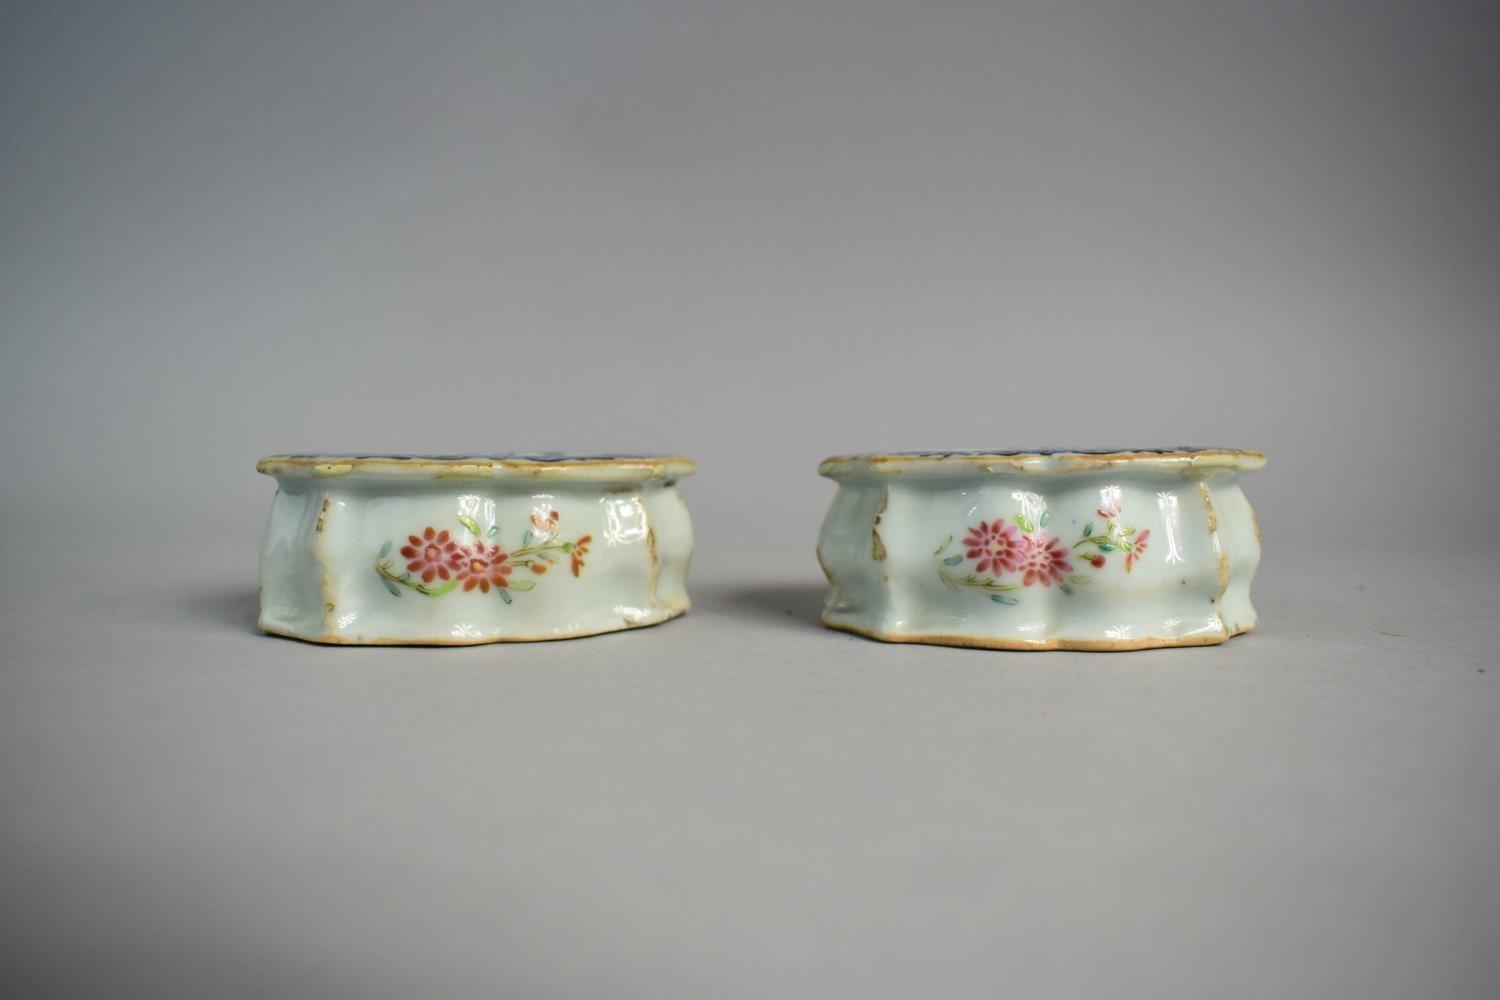 A Pair of Early Chinese Glazed Stoneware Salts decorated with Flowers and Blue and White Border. - Image 3 of 4